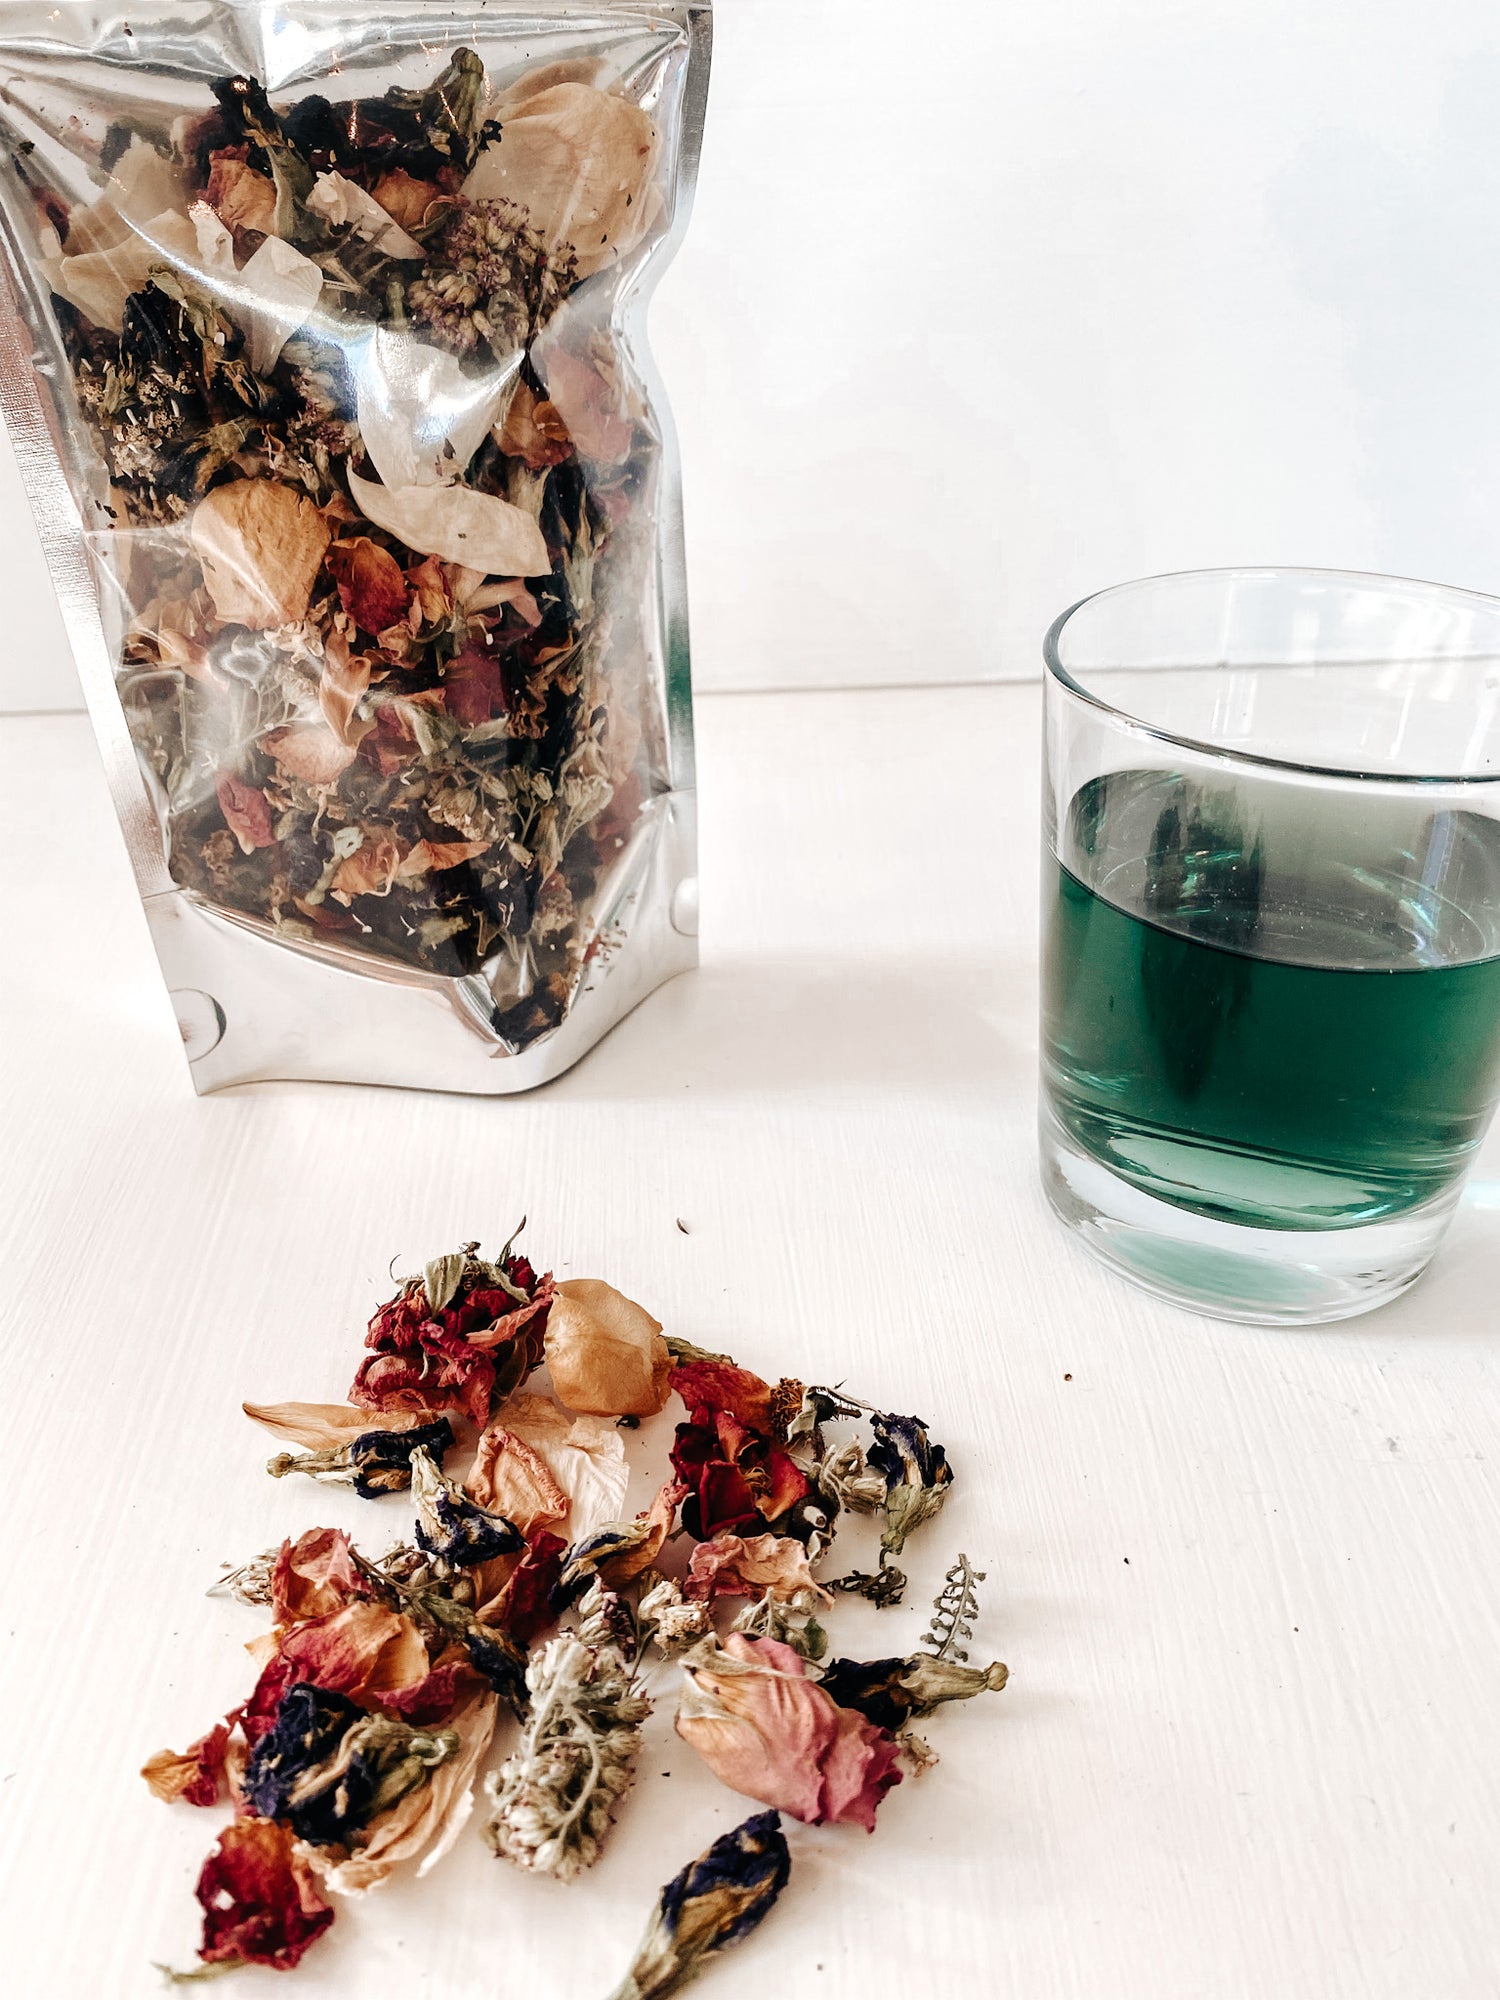 Teas & infusions